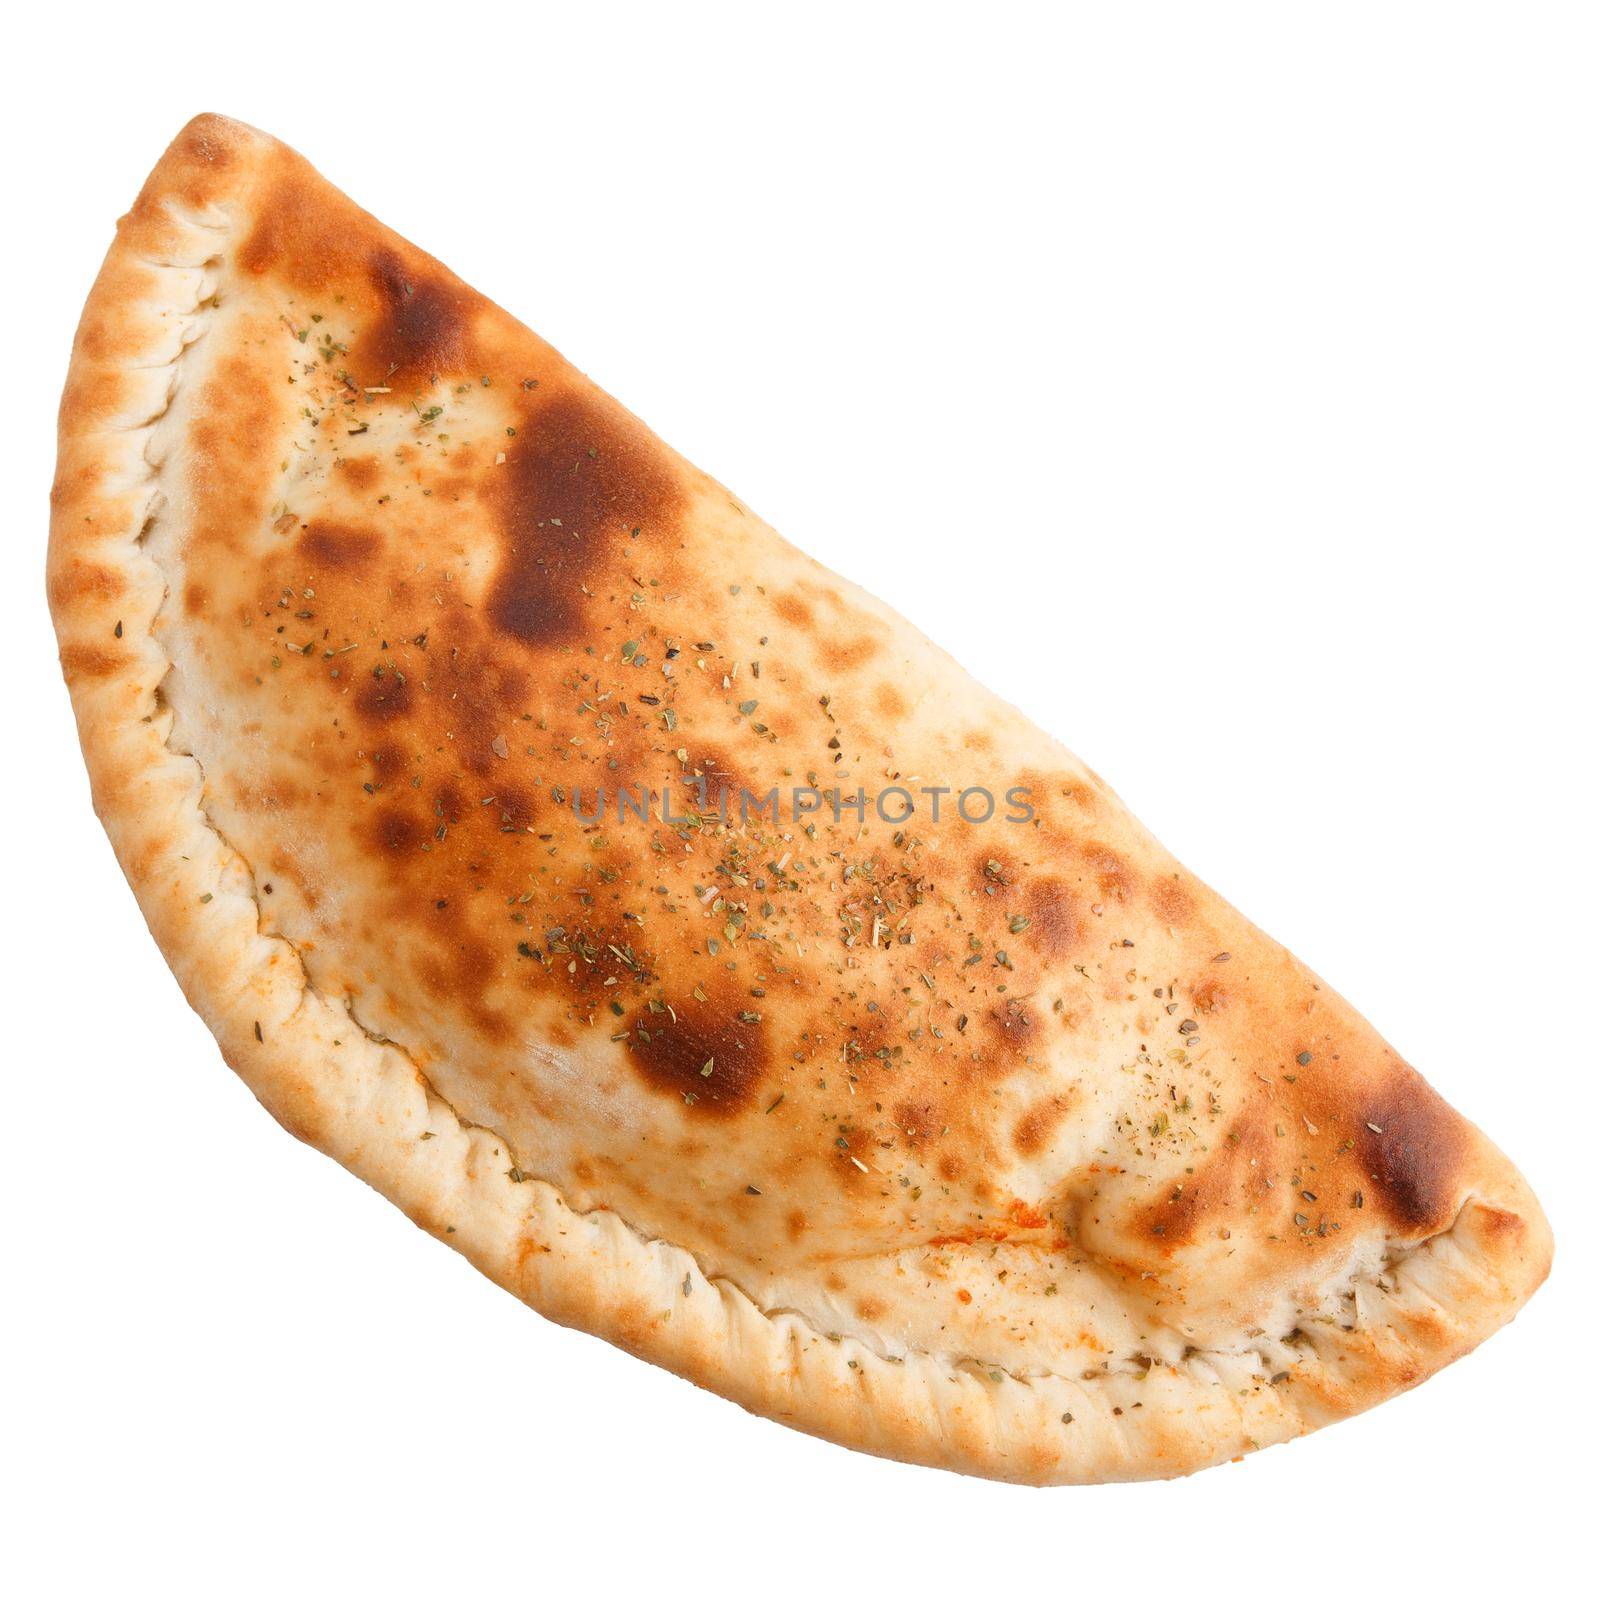 Homemade cheburek, fried meat in dough, isolated on a white background.